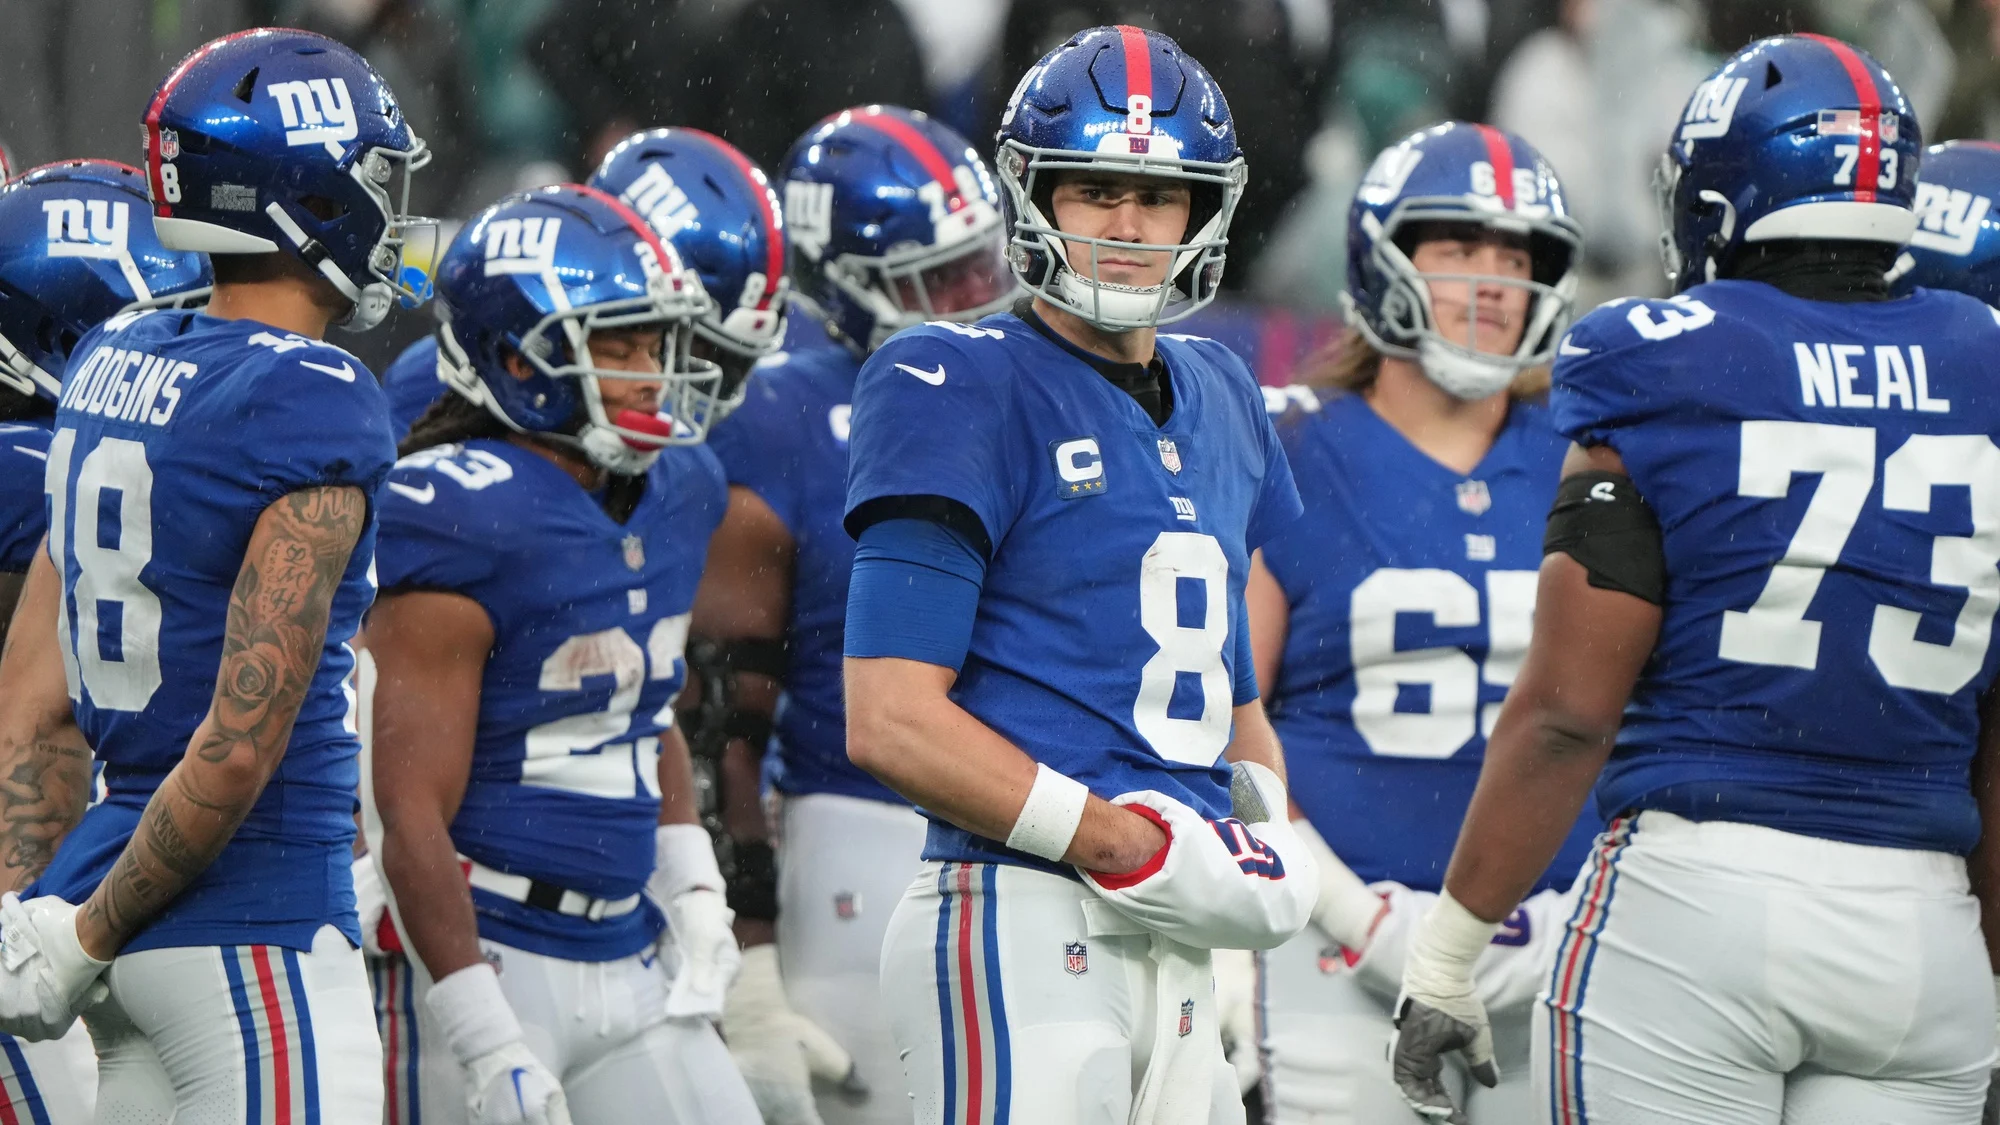 NFL News: New York Giants Actively Finding Daniel Jones’ Replacement, Might Secure Drew Lock Or Carson Beck